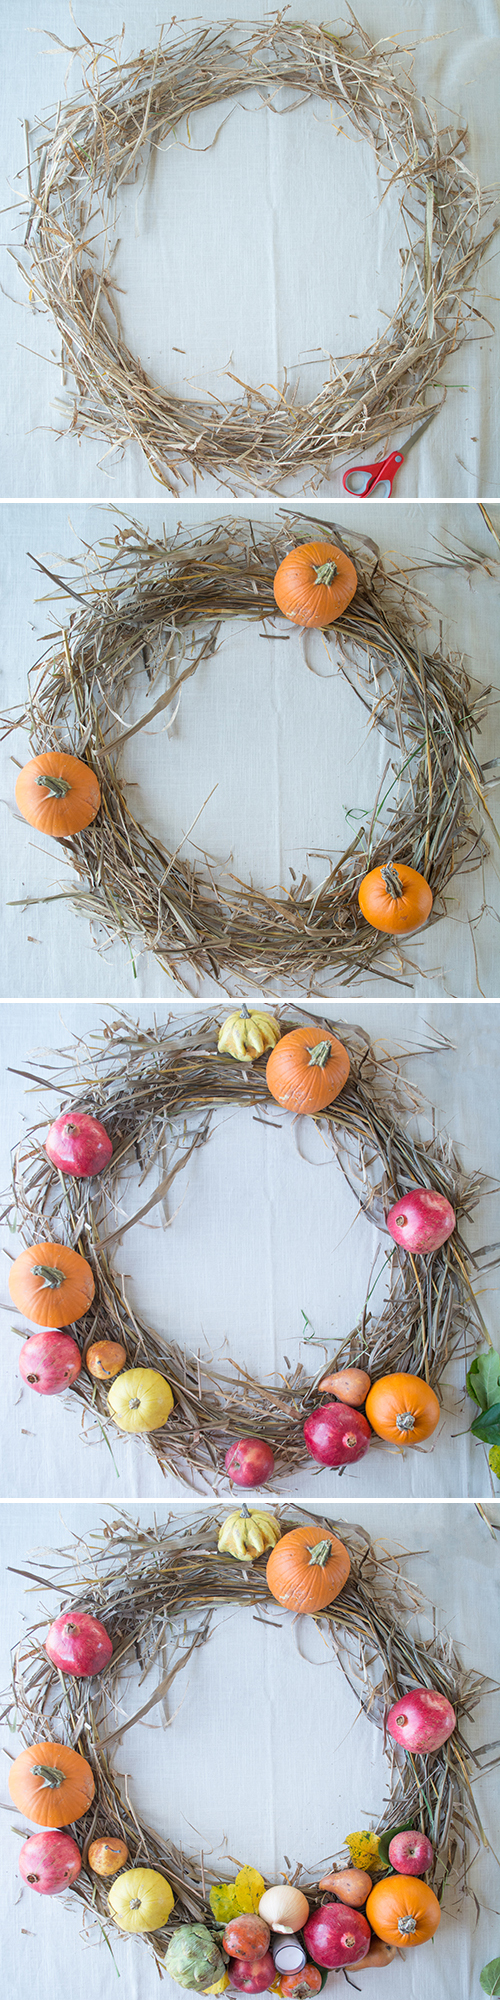 Create a Beautiful Thanksgiving Table Centerpiece | Design Mom